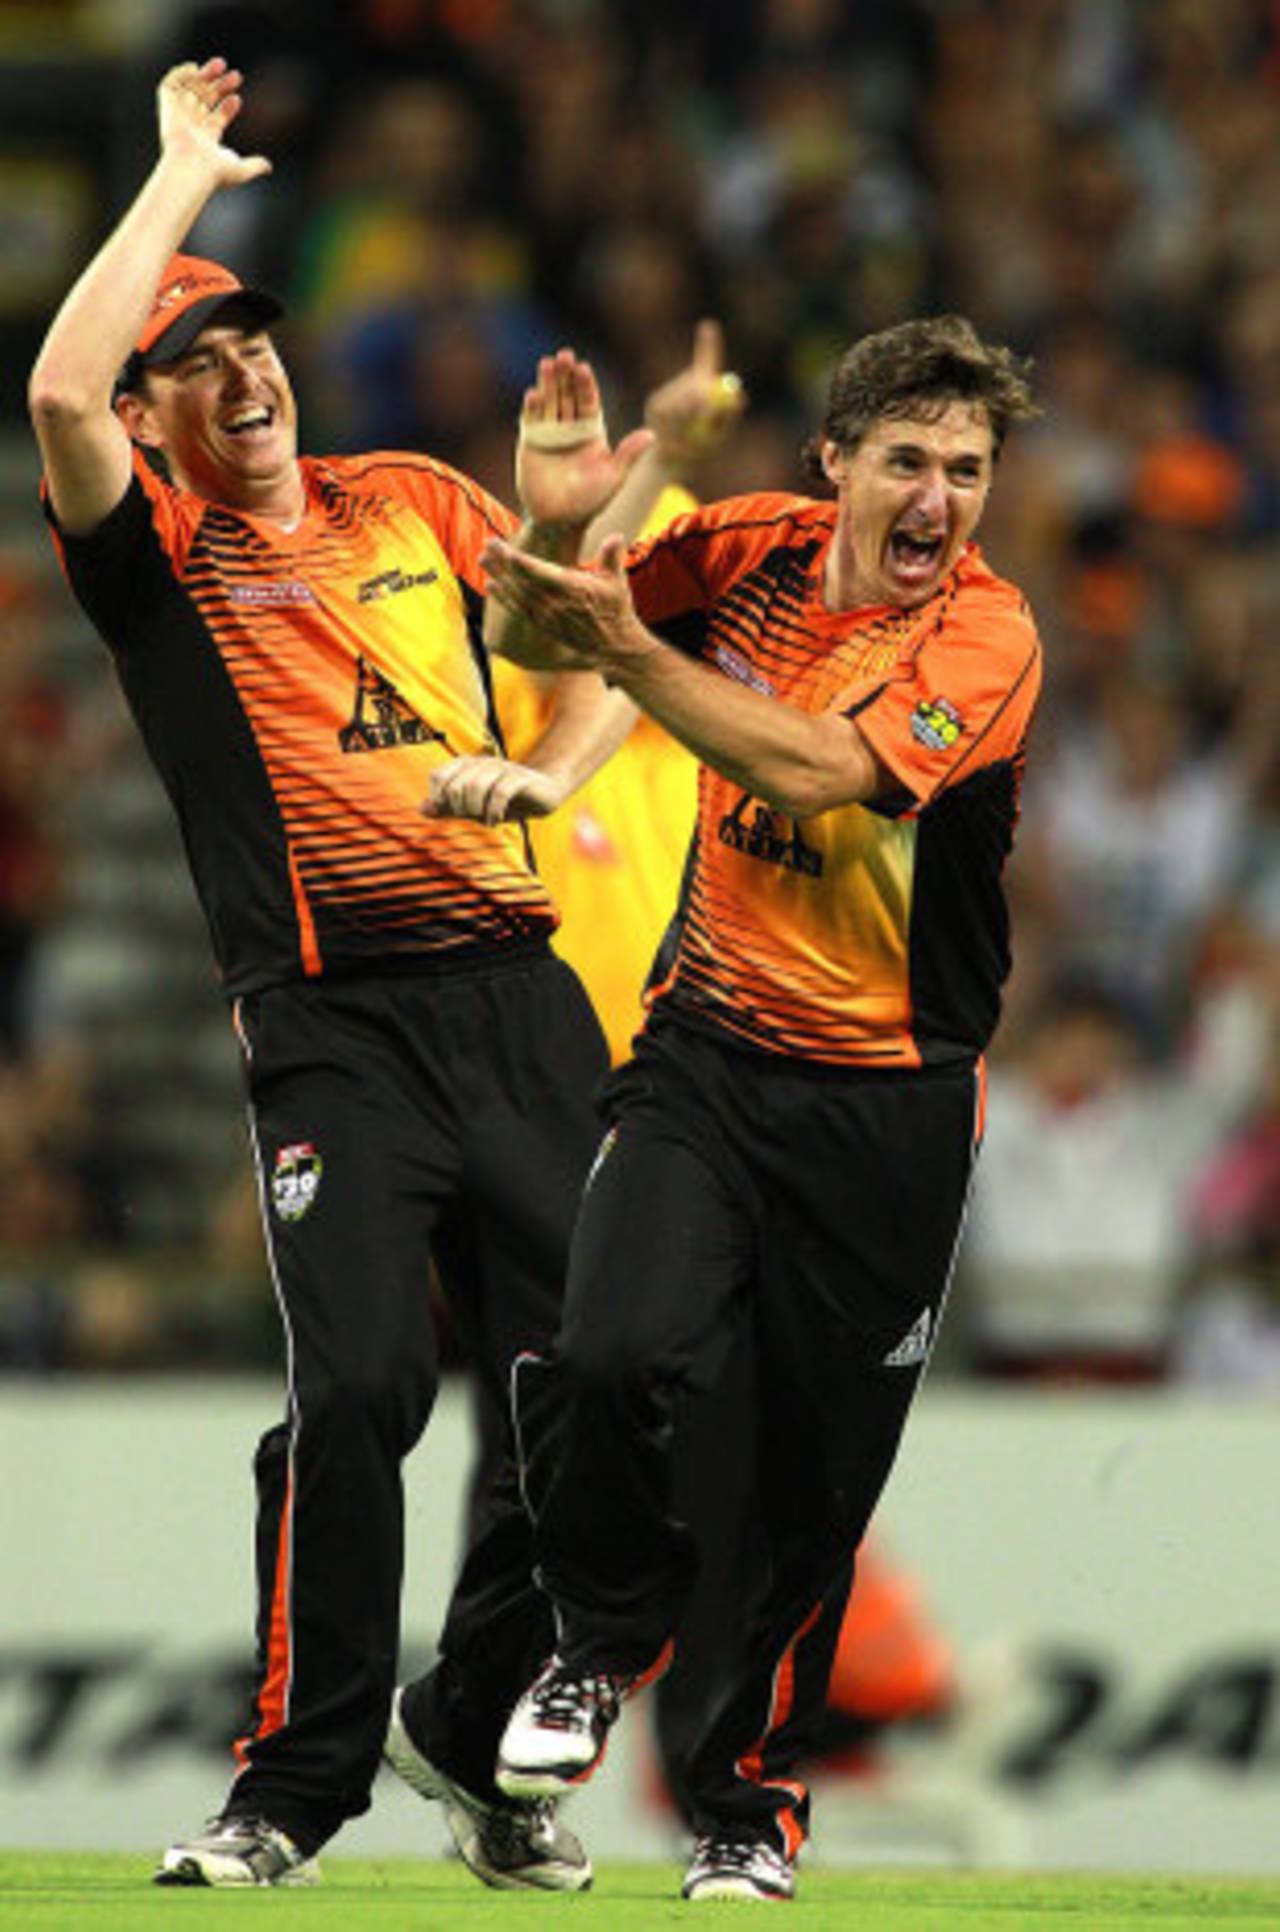 Brad Hogg will be back in the Perth Scorchers colours next summer&nbsp;&nbsp;&bull;&nbsp;&nbsp;Getty Images